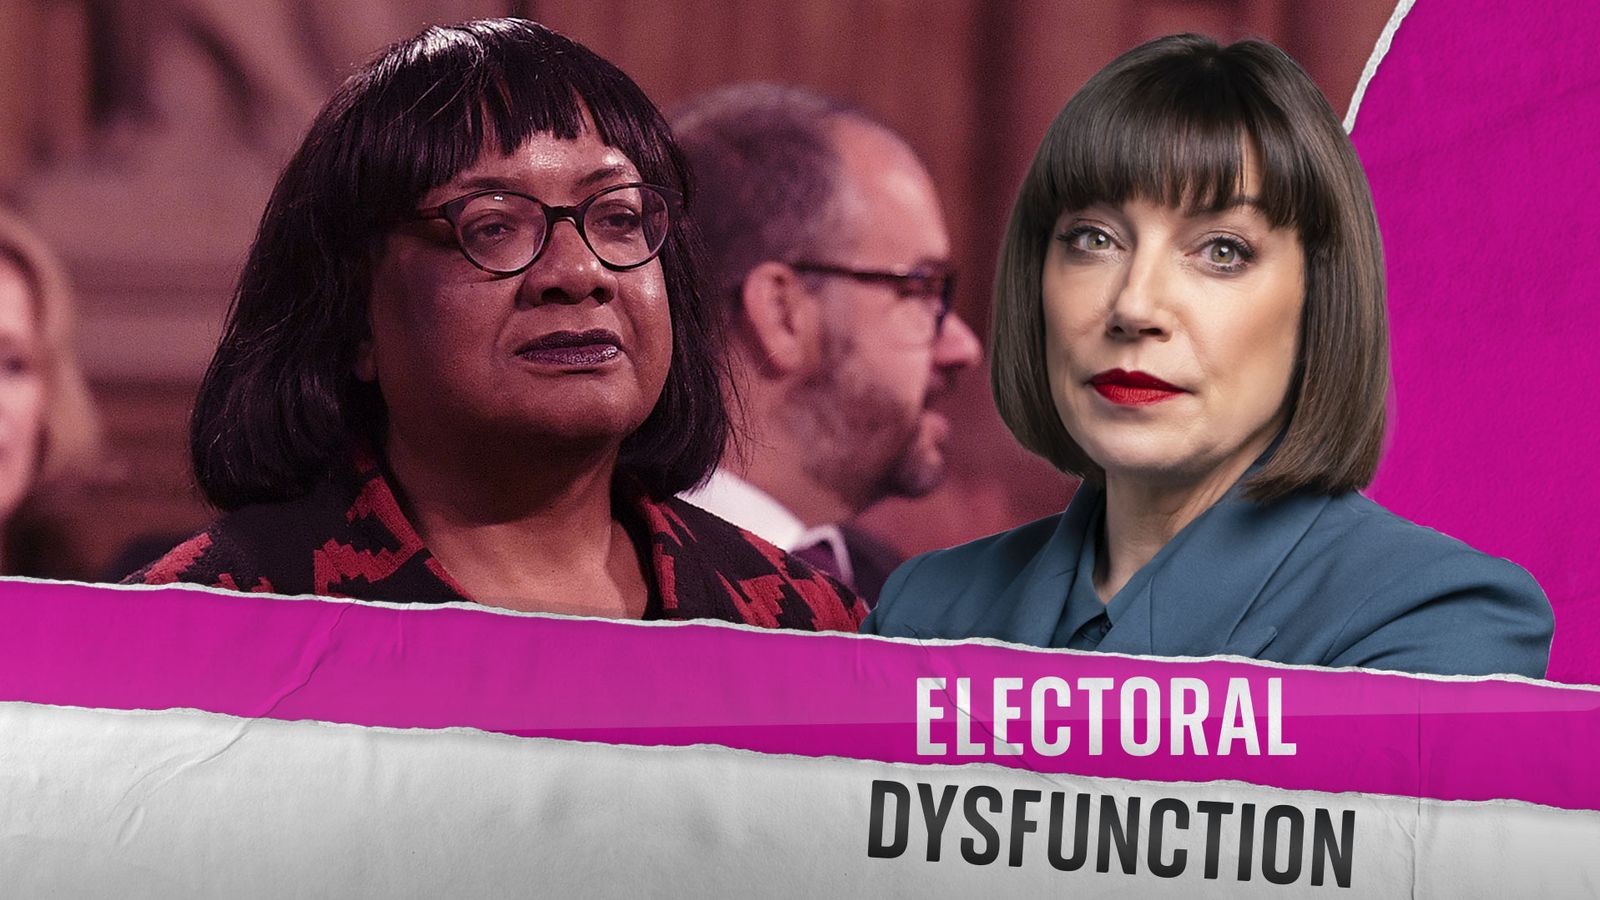 Electoral Dysfunction: Lee Anderson's defection and the Diane Abbott race row show politics is toxic